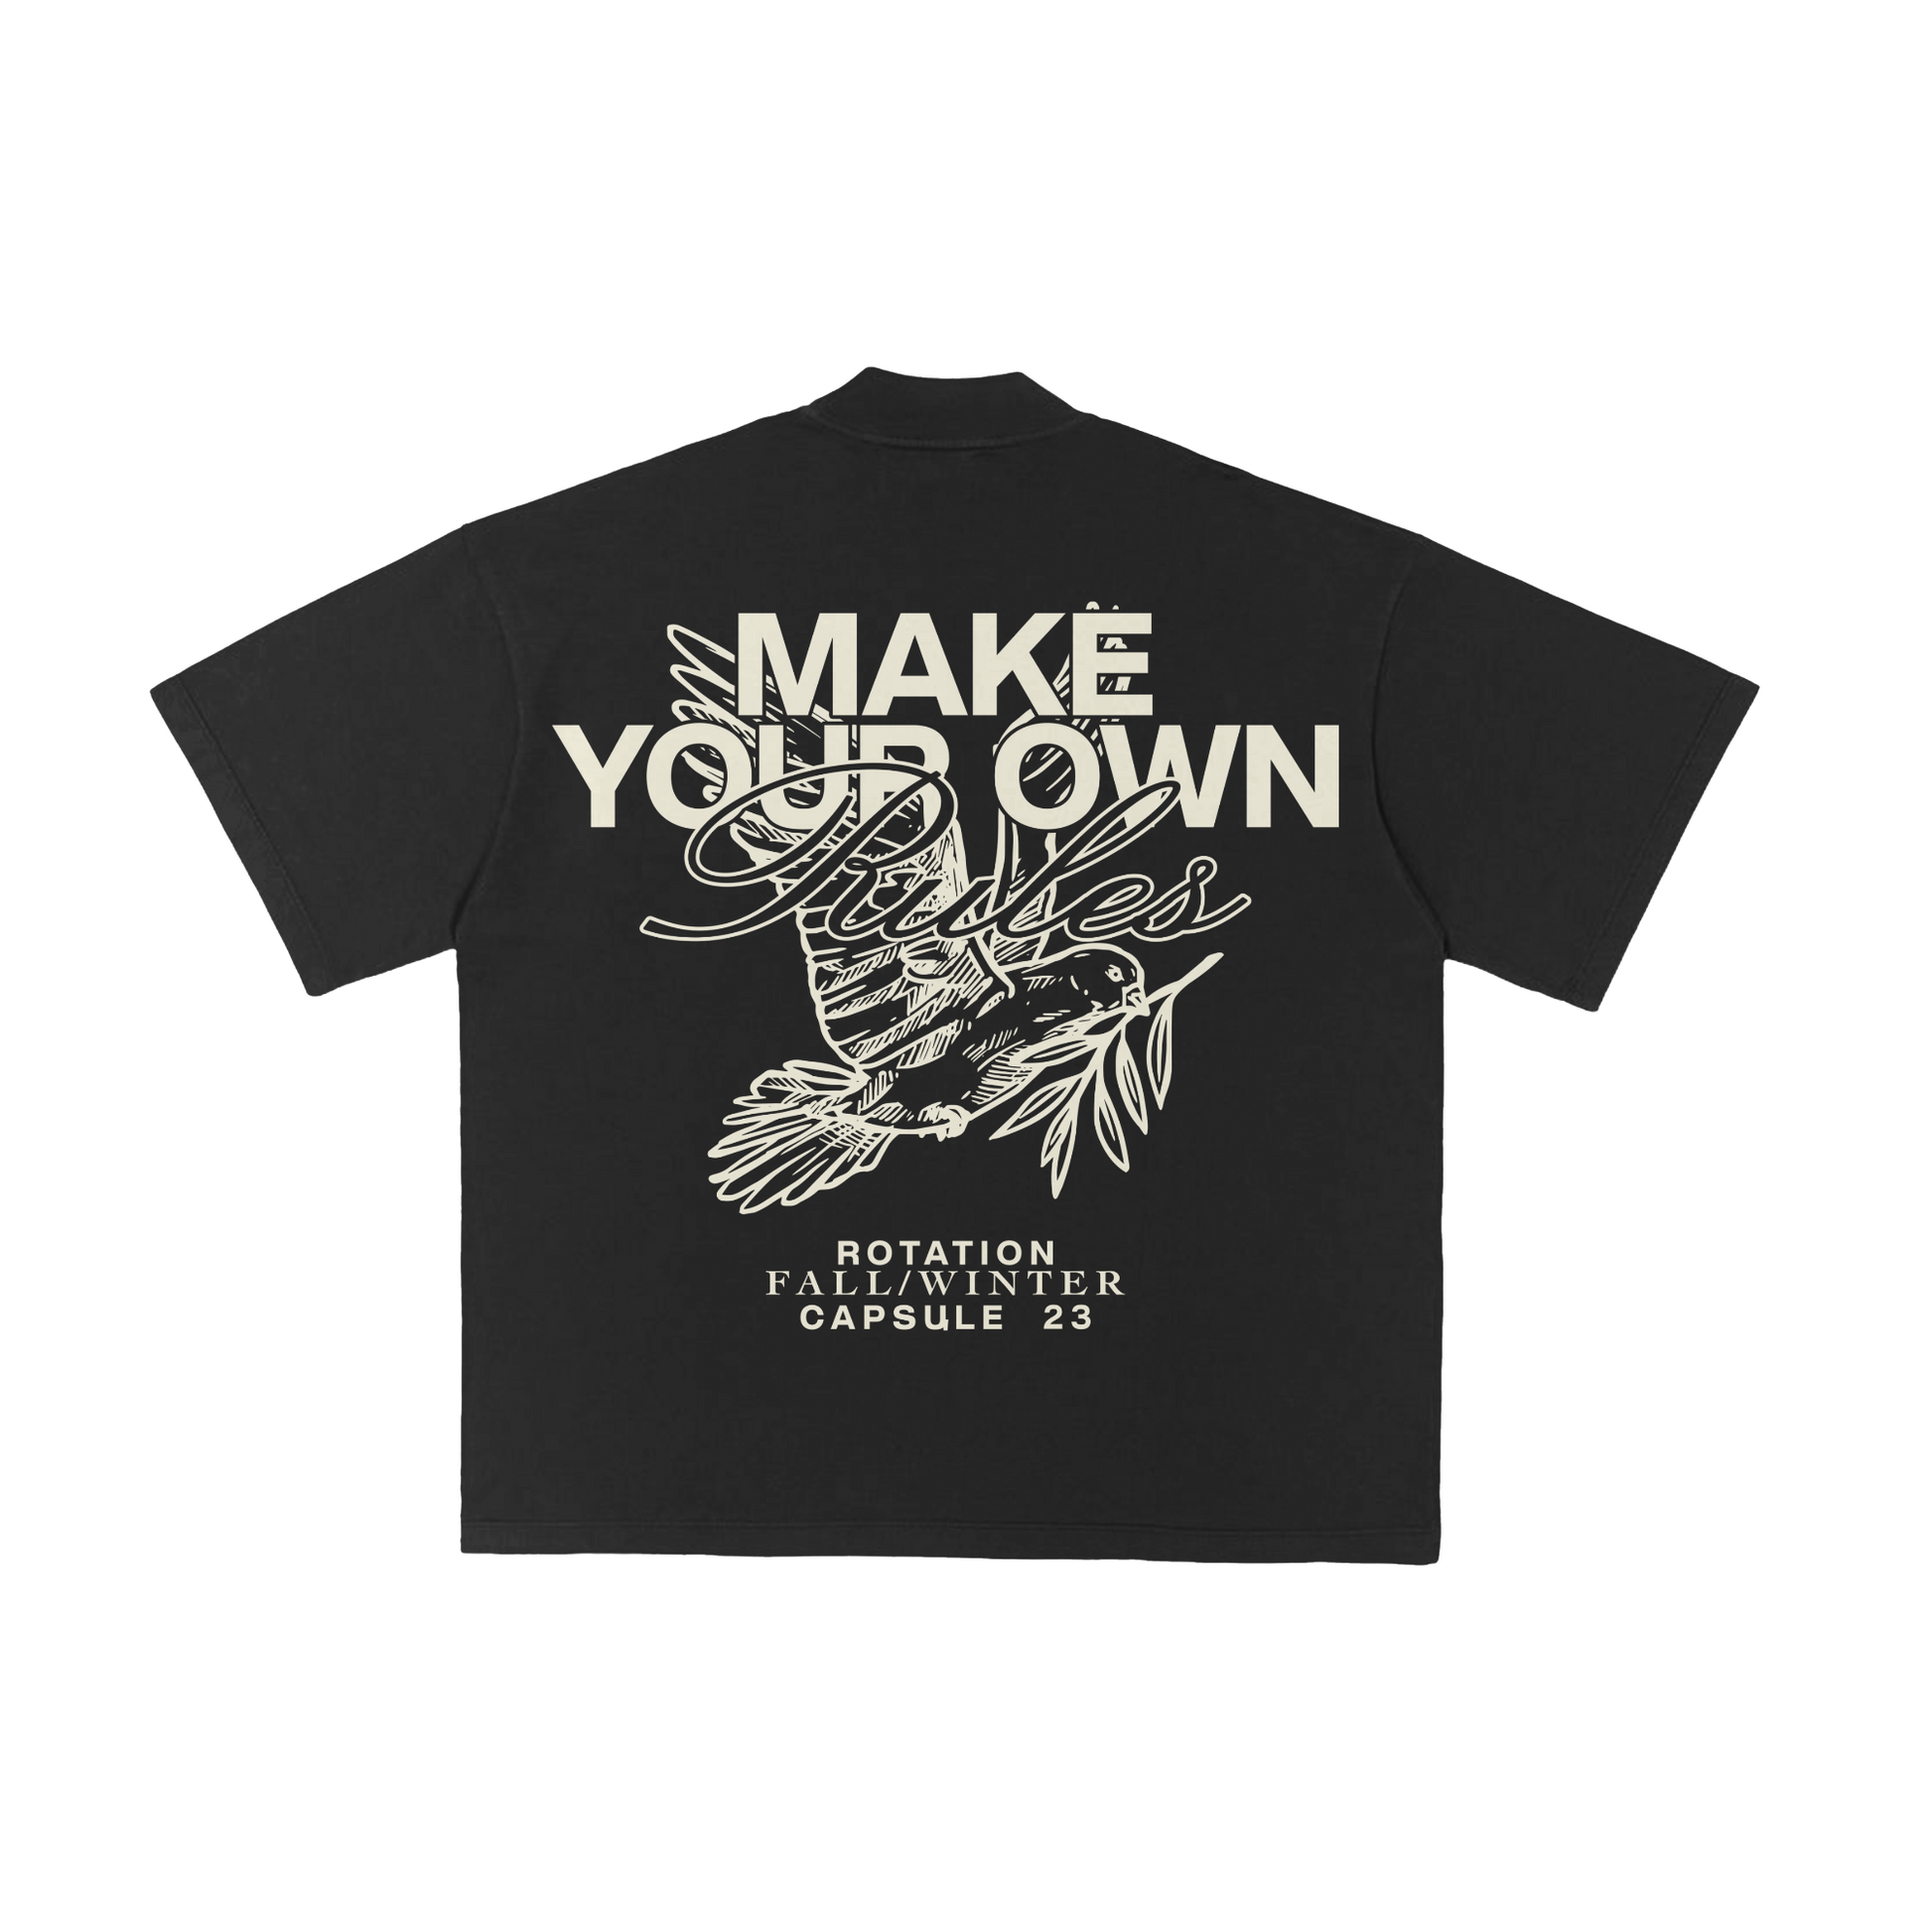 Make Your Own Rules T-Shirt Black - Rotation